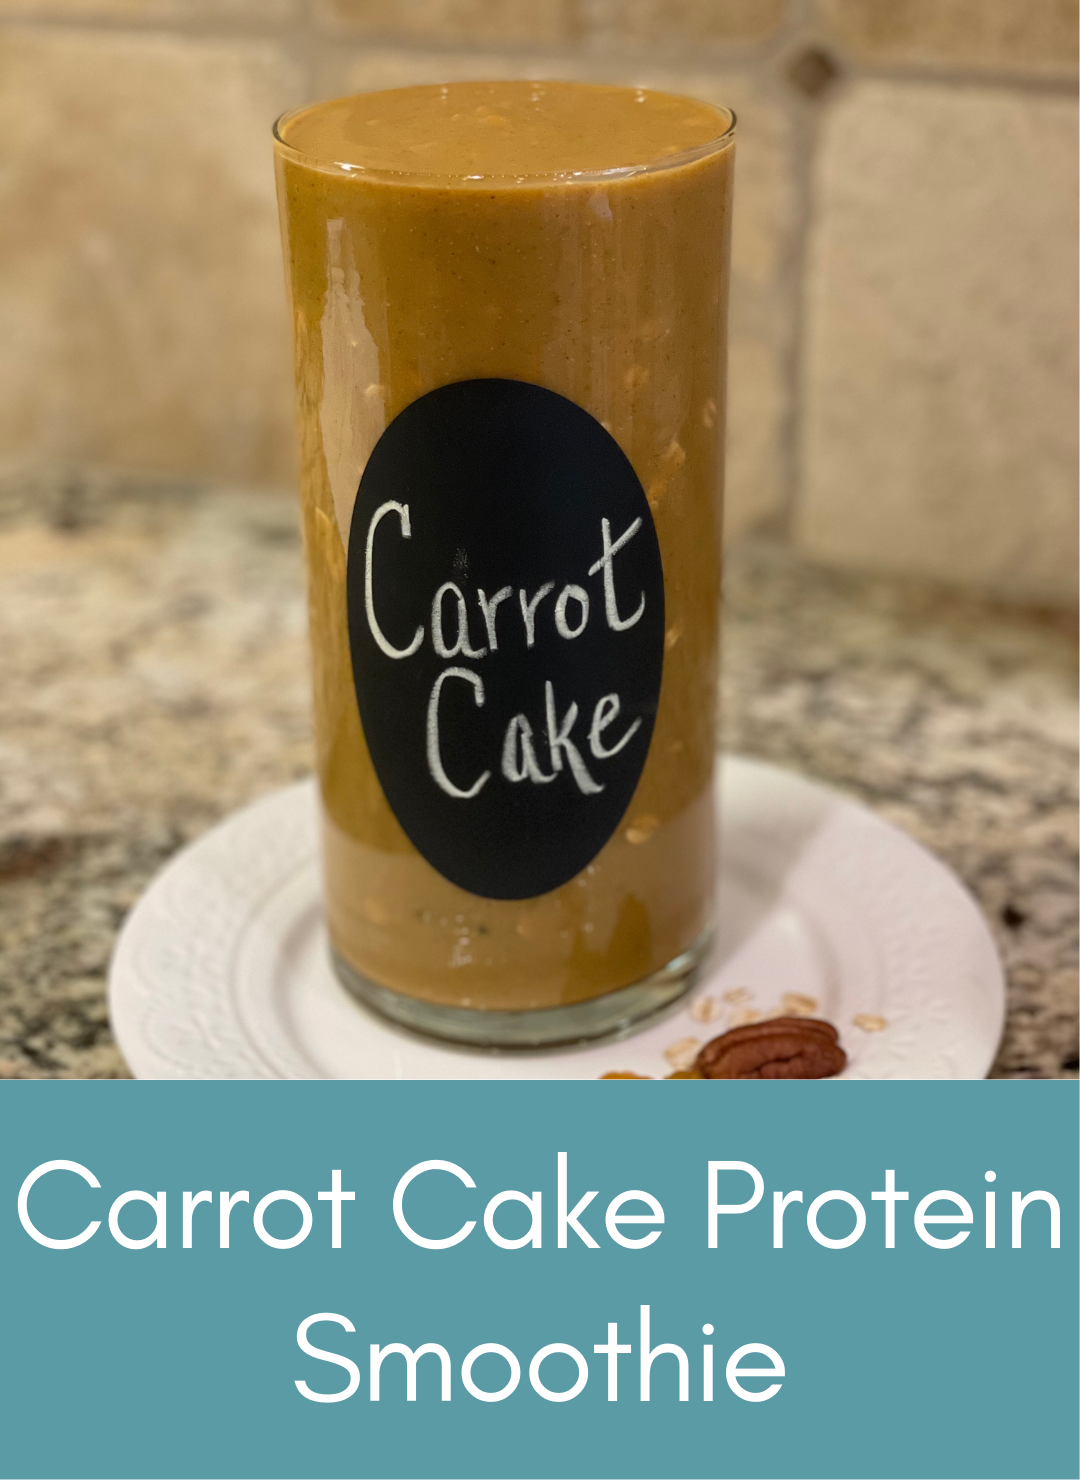 Carrot cake protein power smoothie Picture with link to recipe